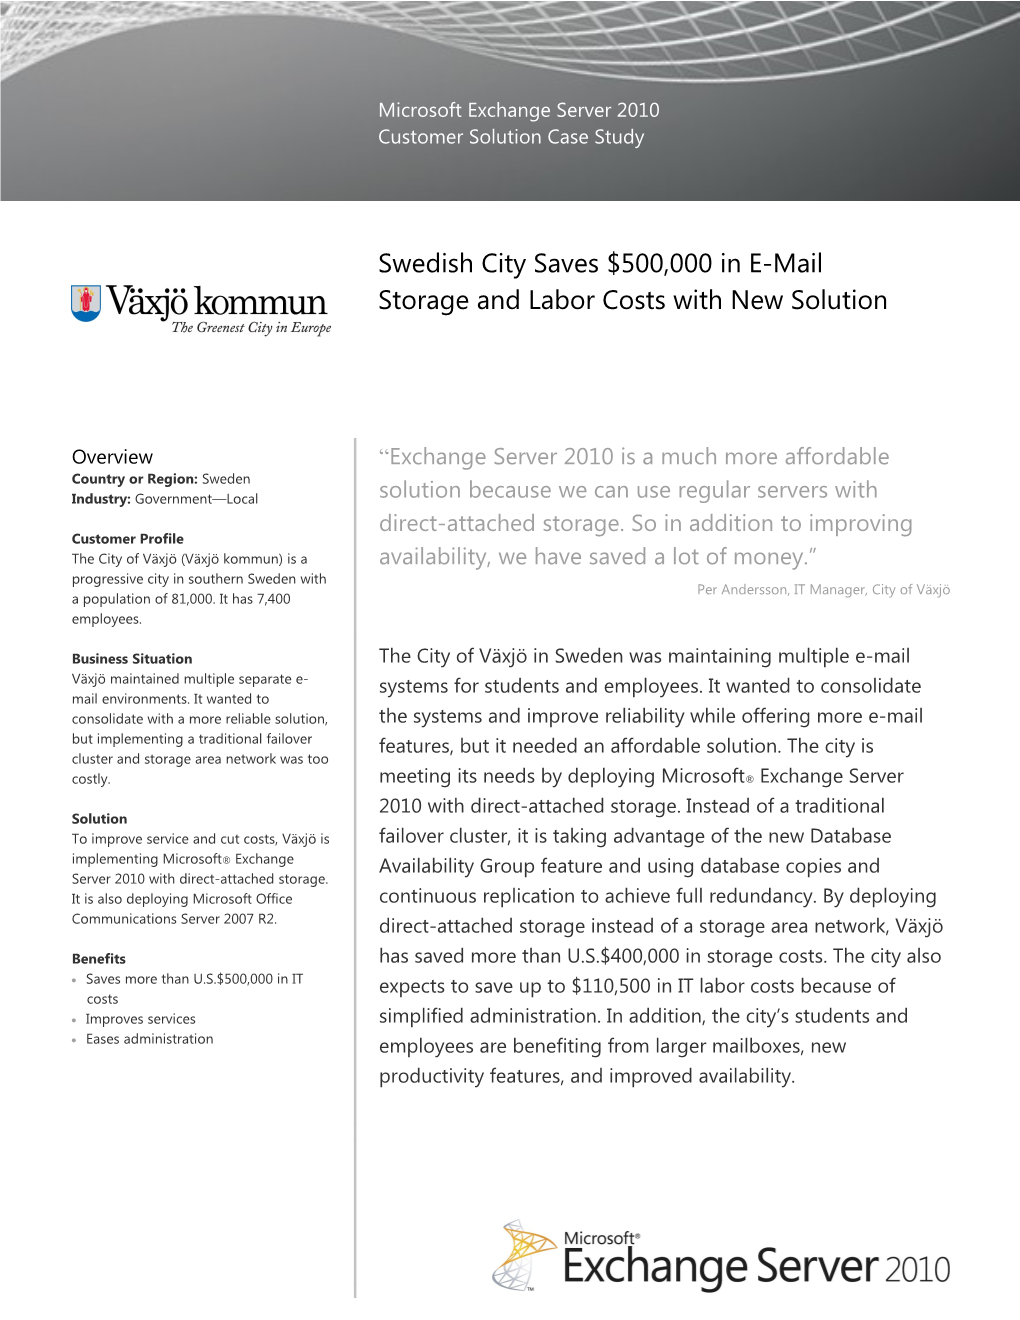 Swedish City Saves $500,000 in E-Mail Storage and Labor Costs with New Solution